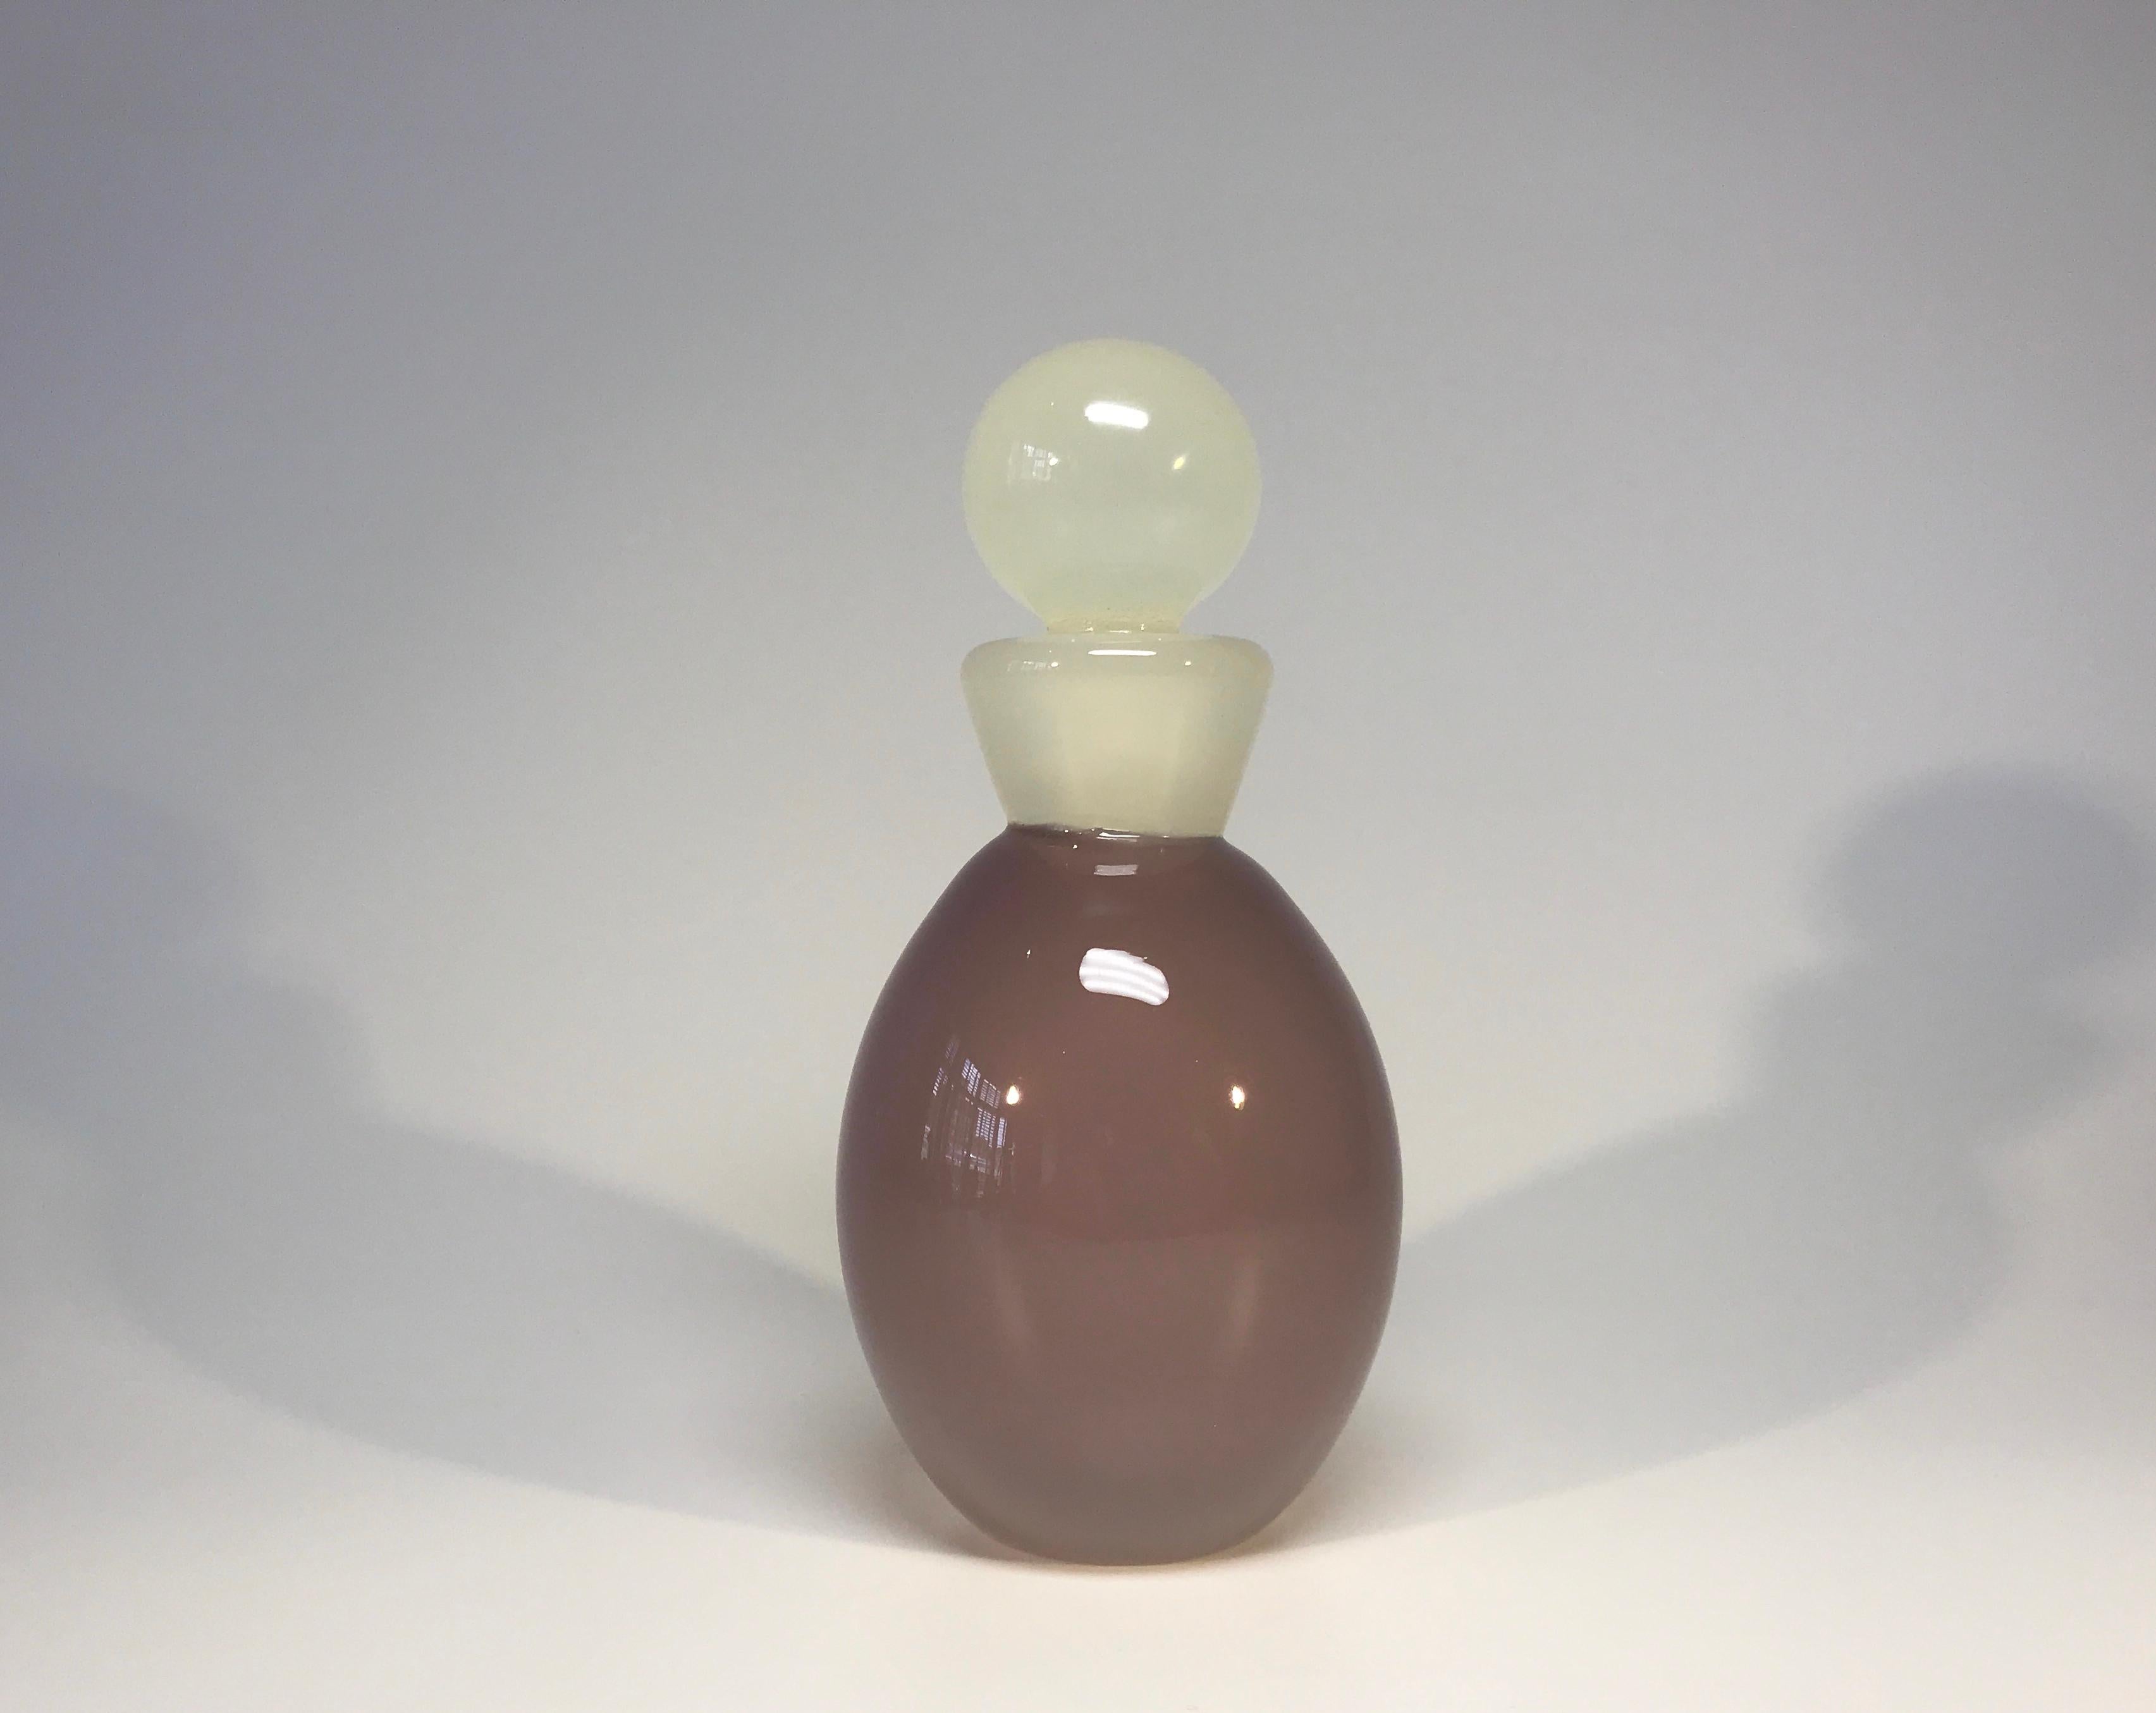 Archimede Seguso Classic Alabastro perfume bottle with stopper
Dark and dusty pink opaque glass bottle with white opaque collar and stopper.
Graceful and understated style from Italy,
circa 1950s
Measures: Height 4.75 inch, diameter 2.25